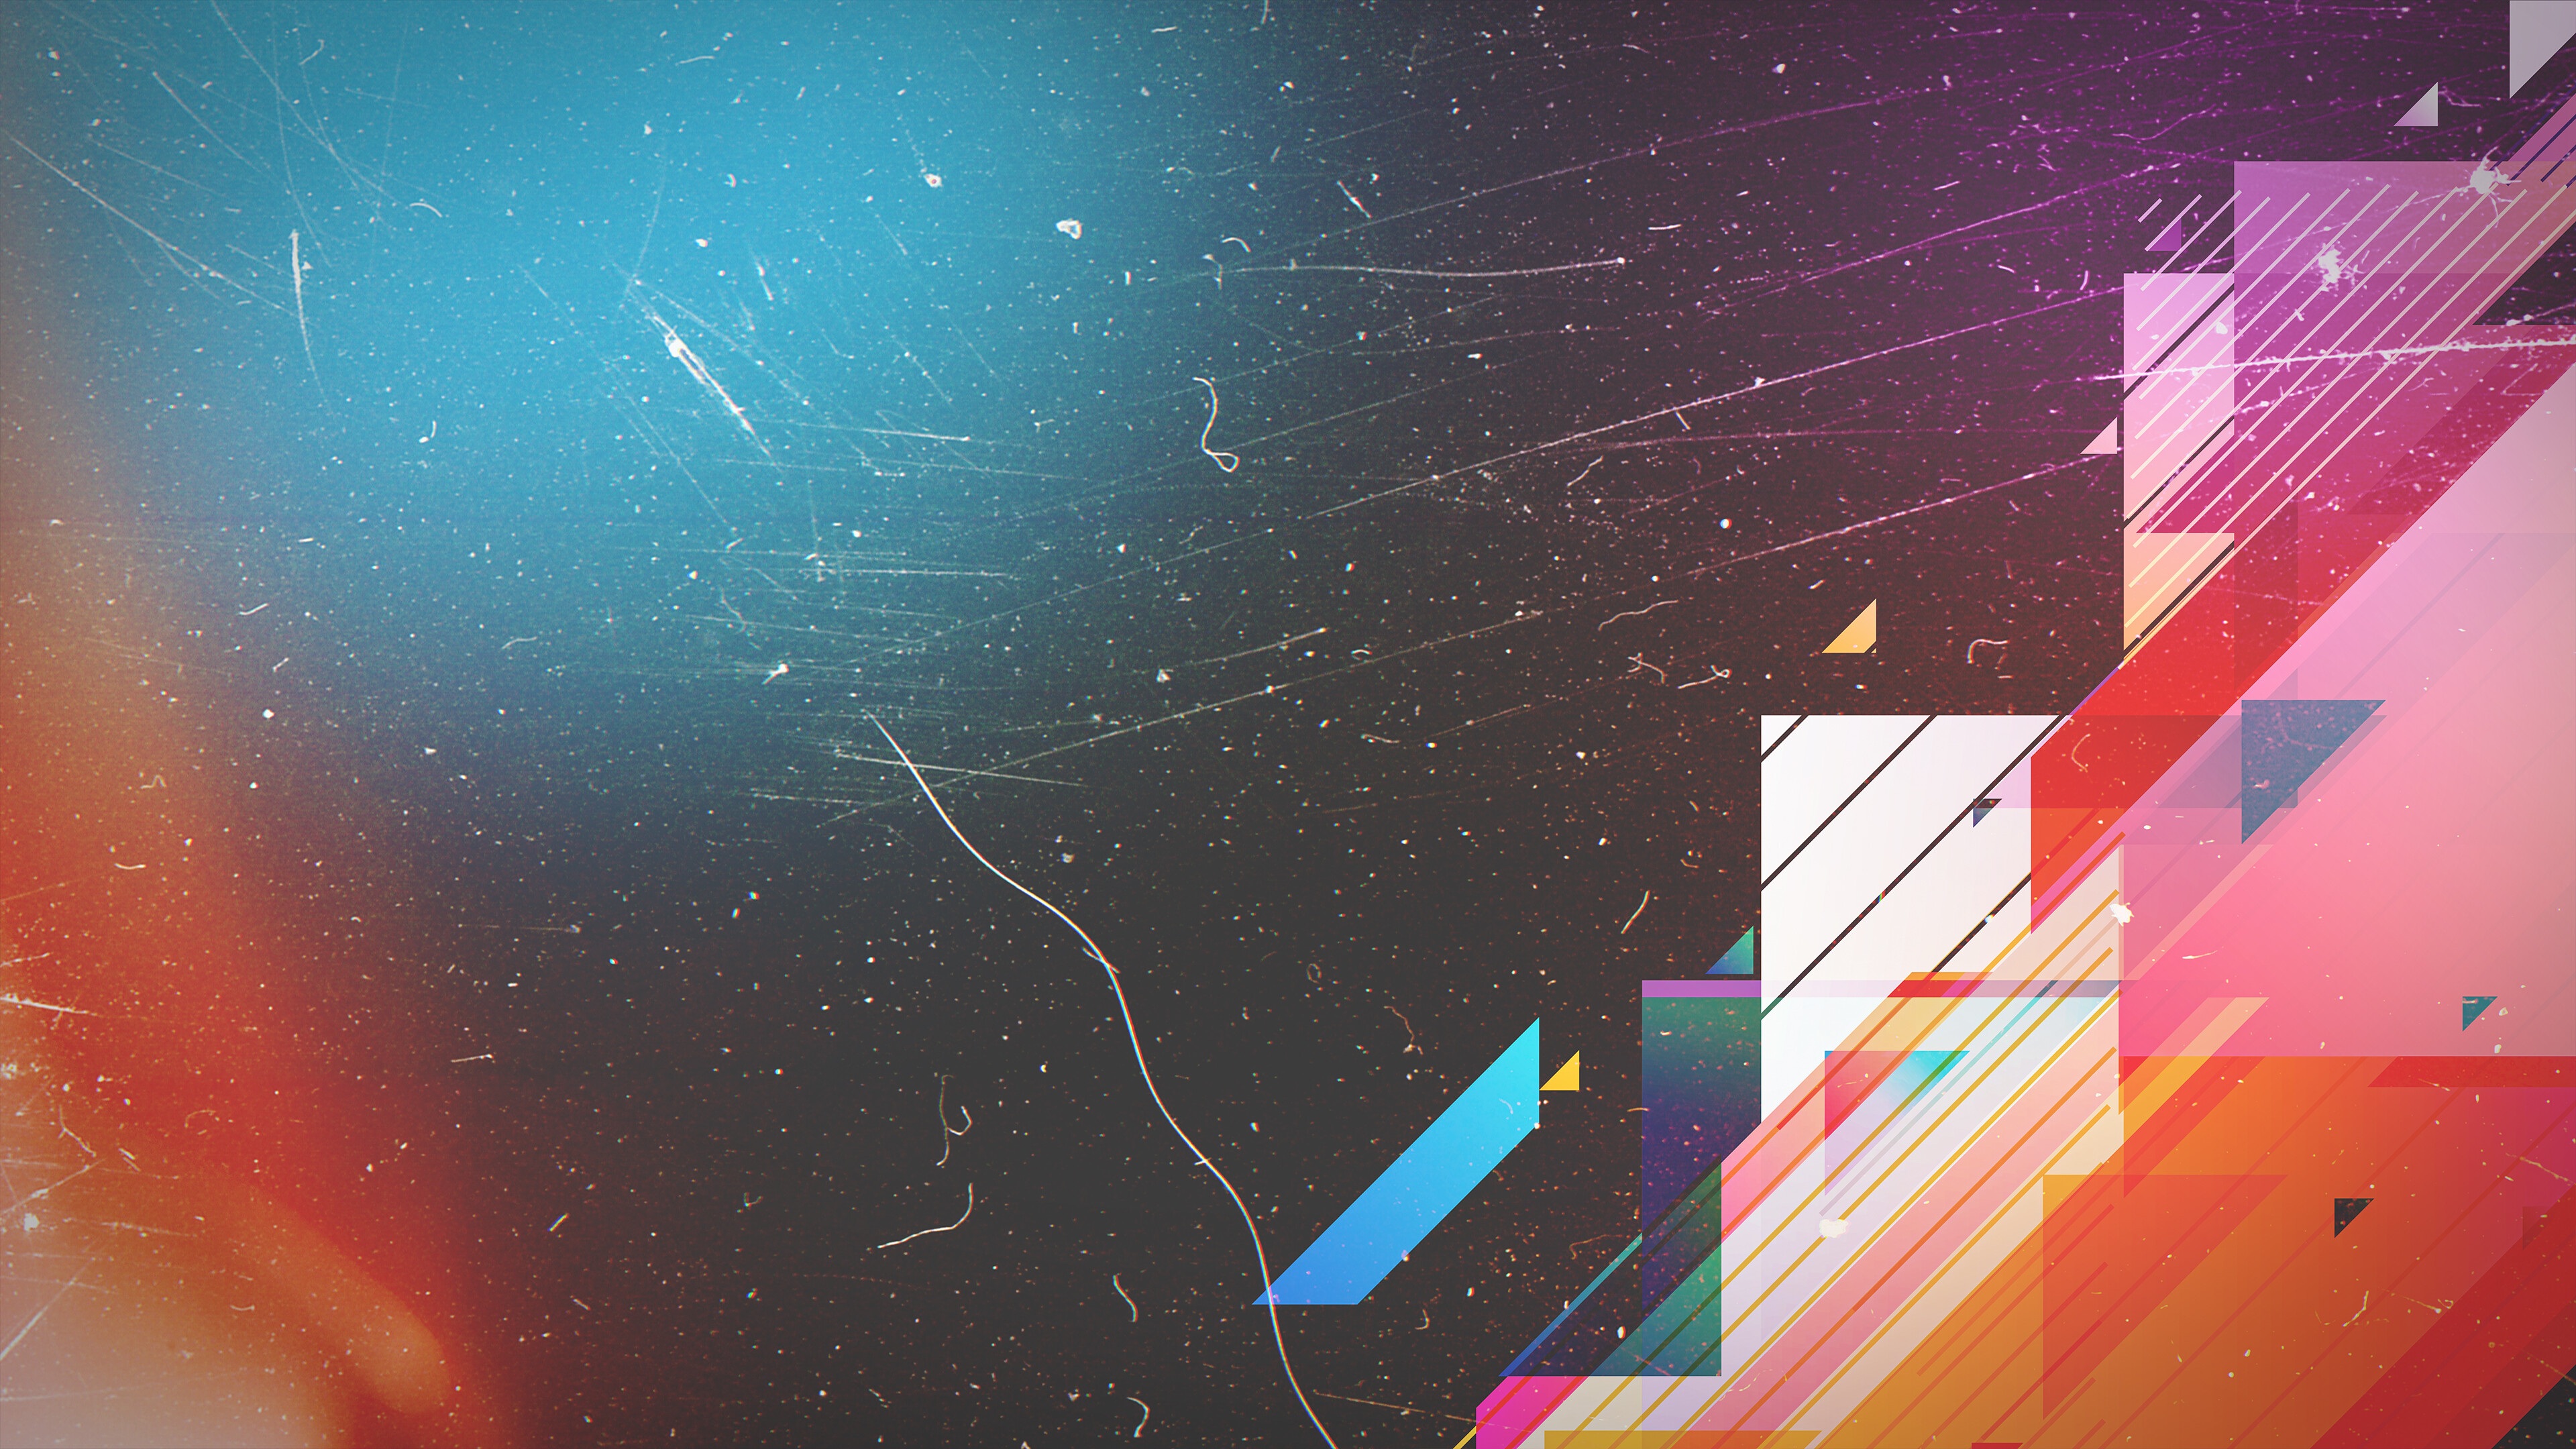 Geometry: Creative abstract polygonal art, Parallel lines, Trapezoids. 3840x2160 4K Wallpaper.